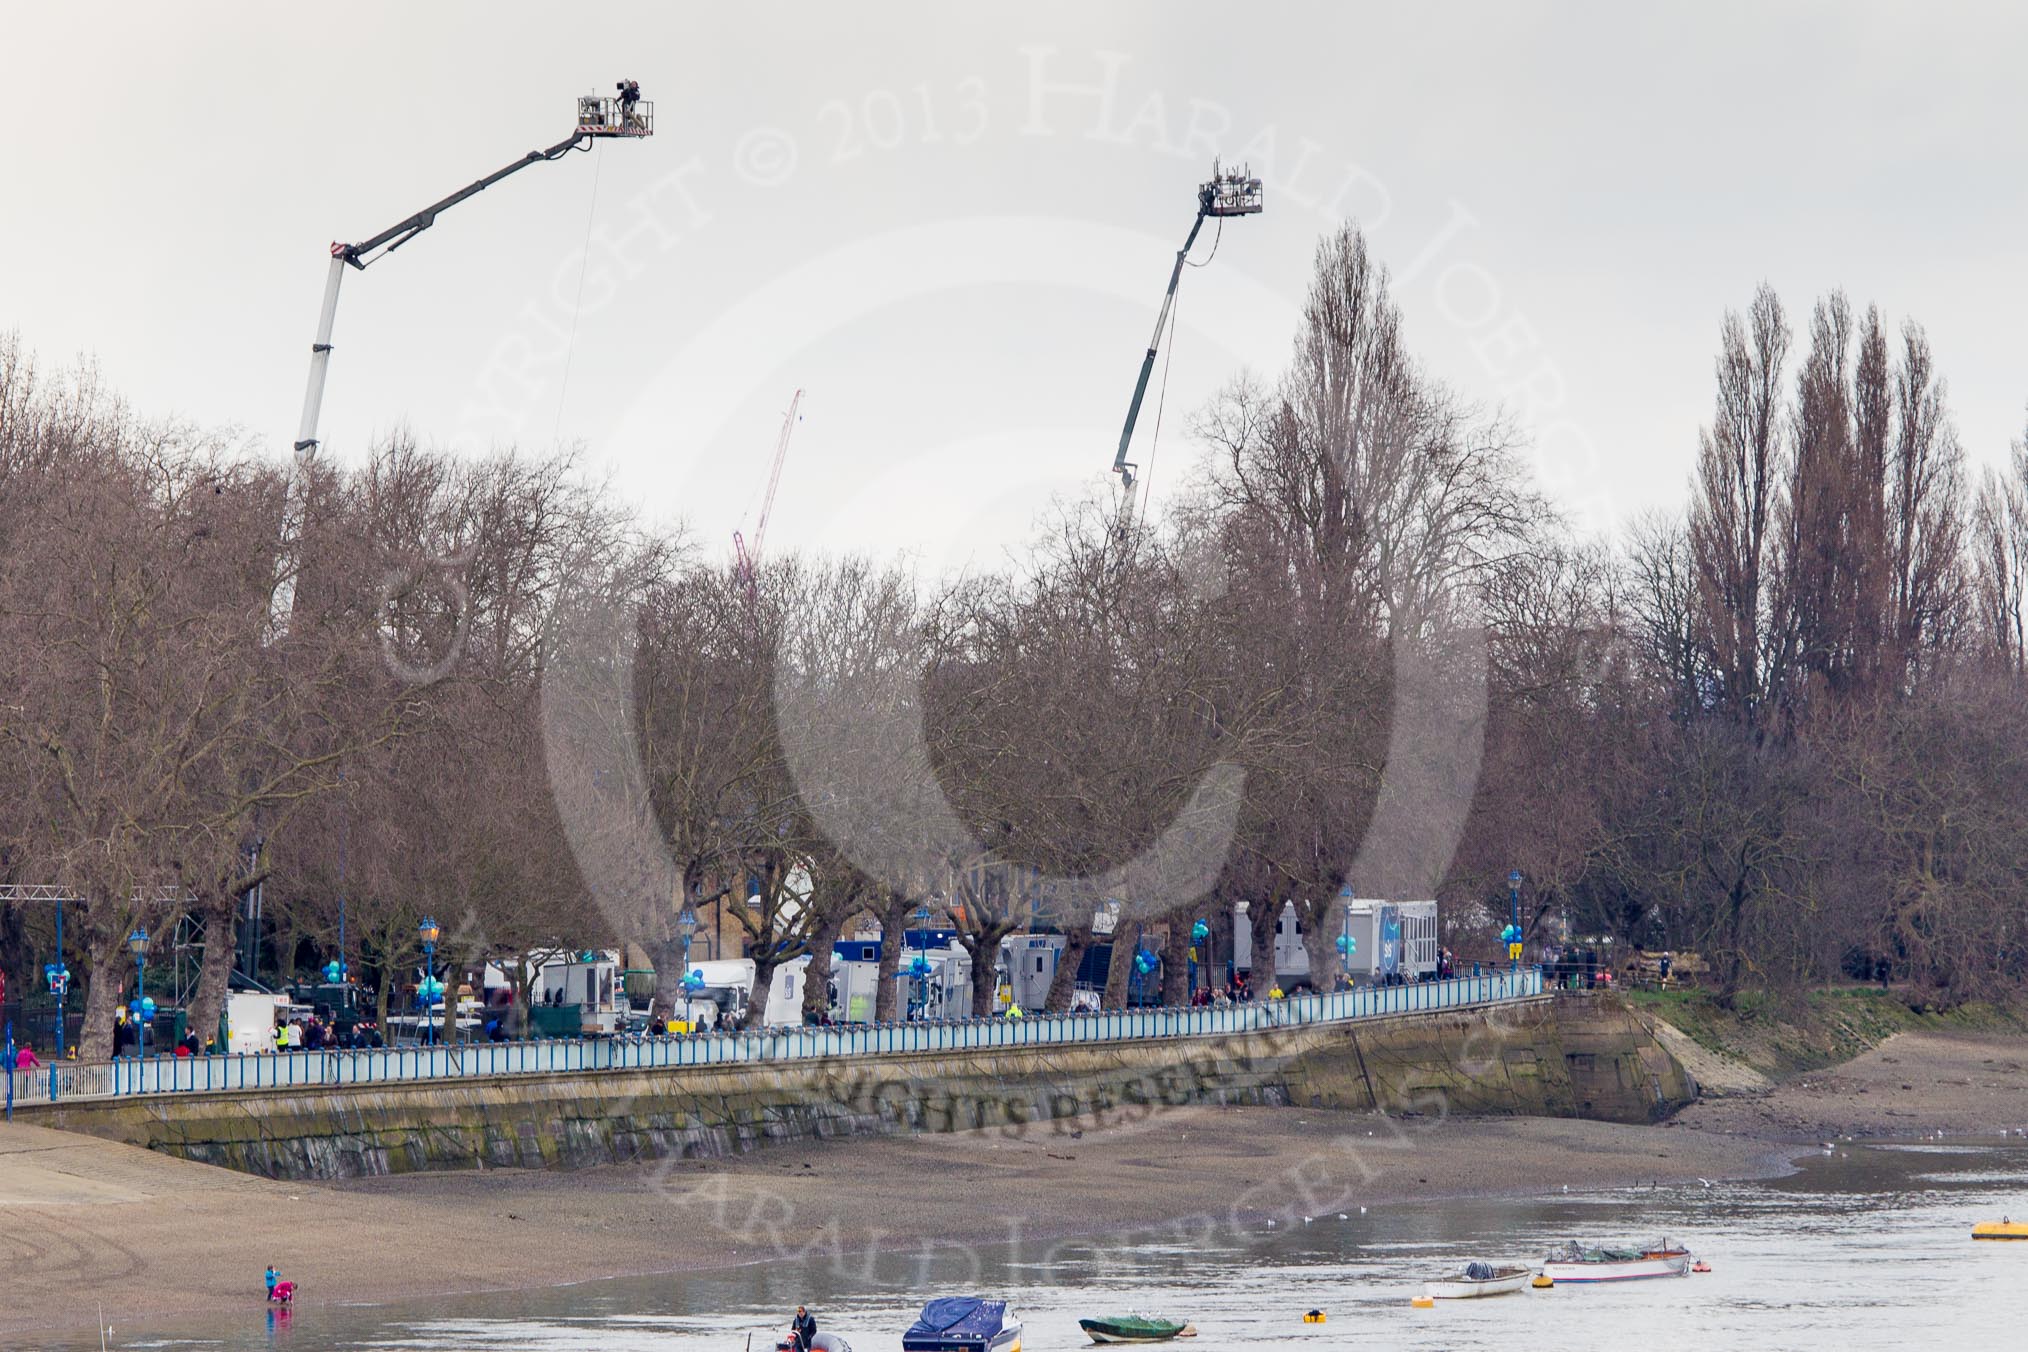 The Boat Race 2013: BBC/SIS Live on Putney Embankment, ready for the live broadcast of the 2013 Boat Race..
Putney,
London SW15,

United Kingdom,
on 31 March 2013 at 11:30, image #21